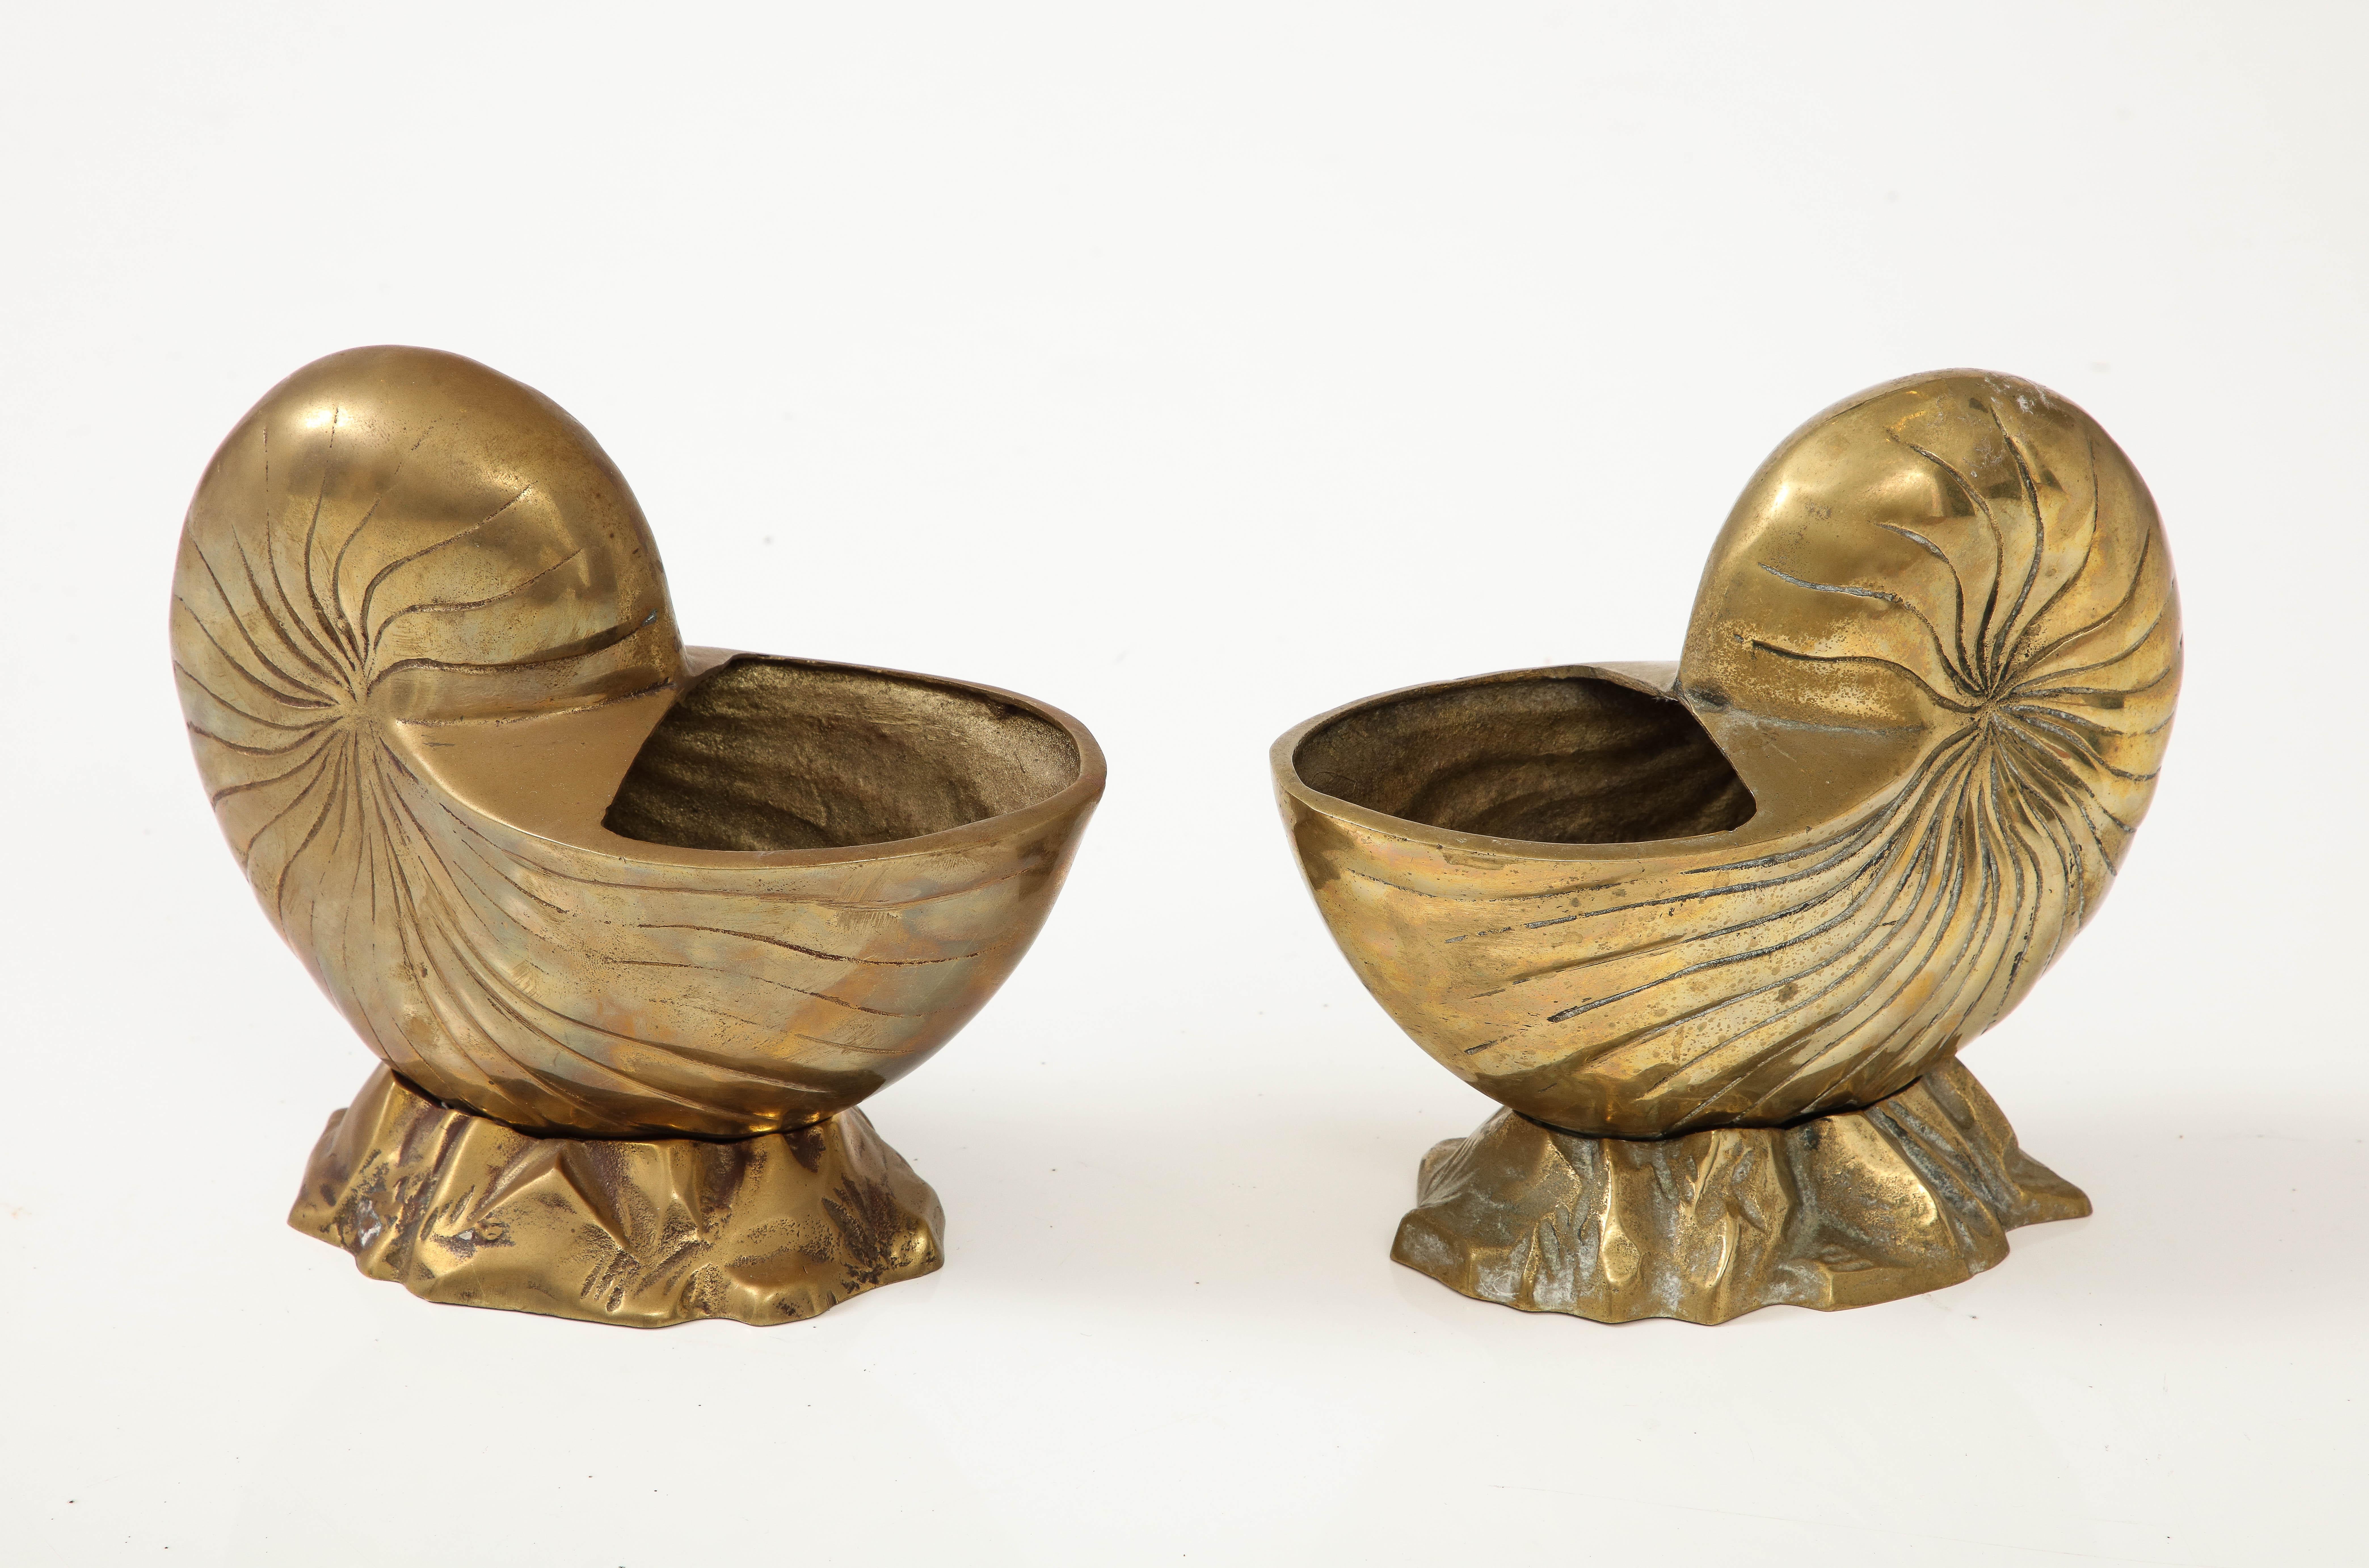 Pair of stylish bronze cache pots, jardinieres with a stylized nautilus motif resting on rocks.